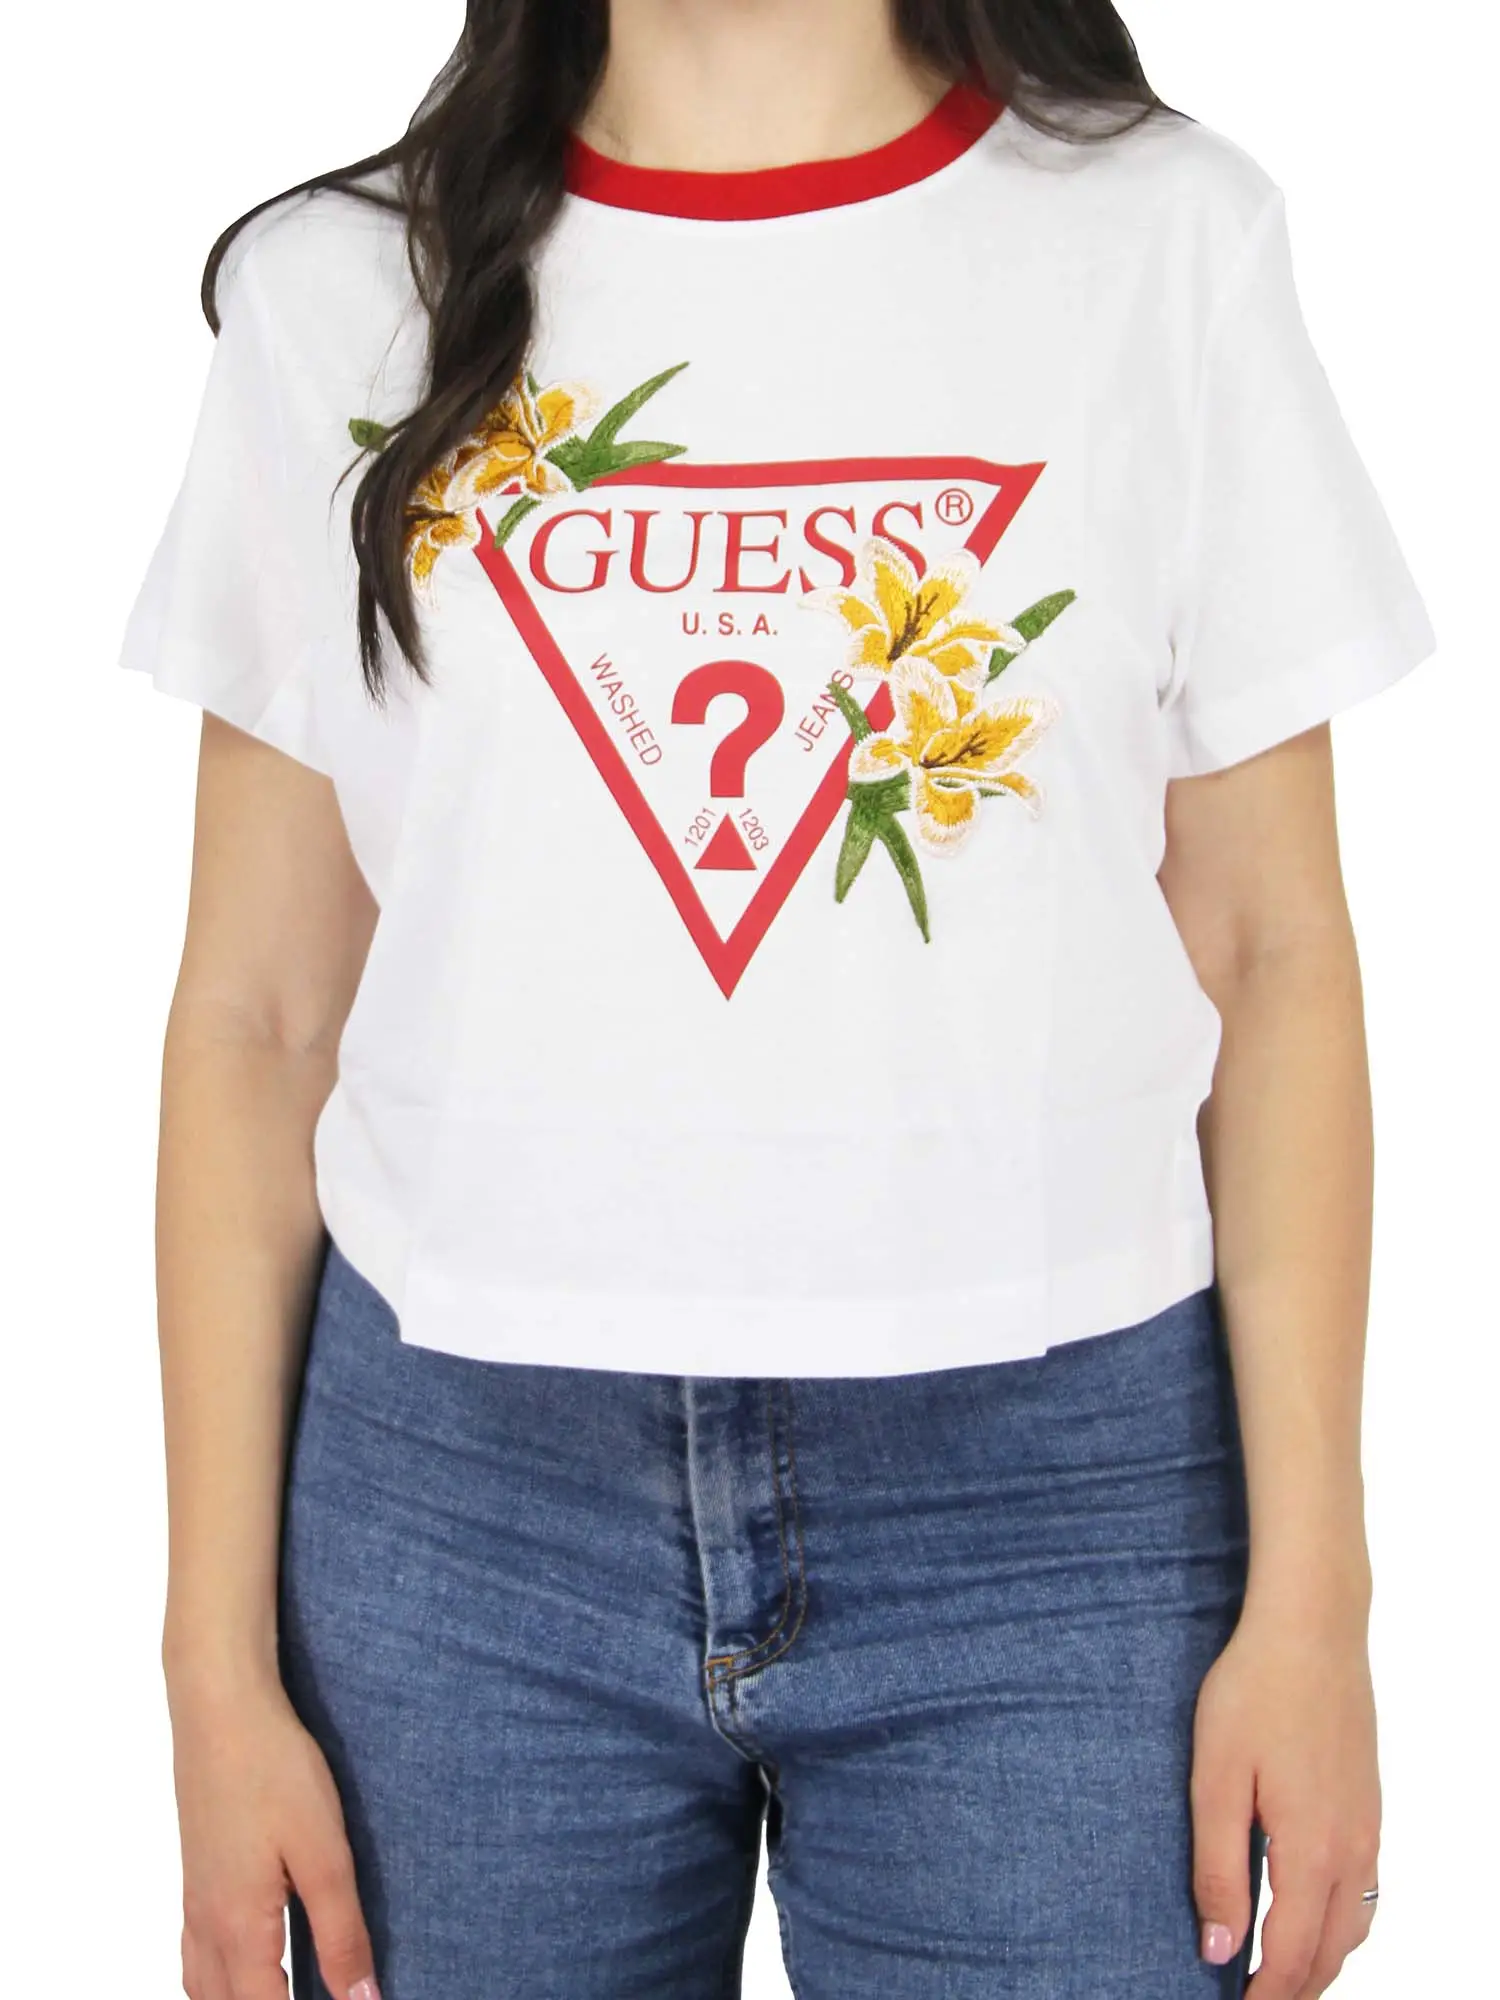 T-SHIRT DONNA - GUESS ATHLEISURE - V4GI02 K46D1 - BIANCO/ROSSO, M